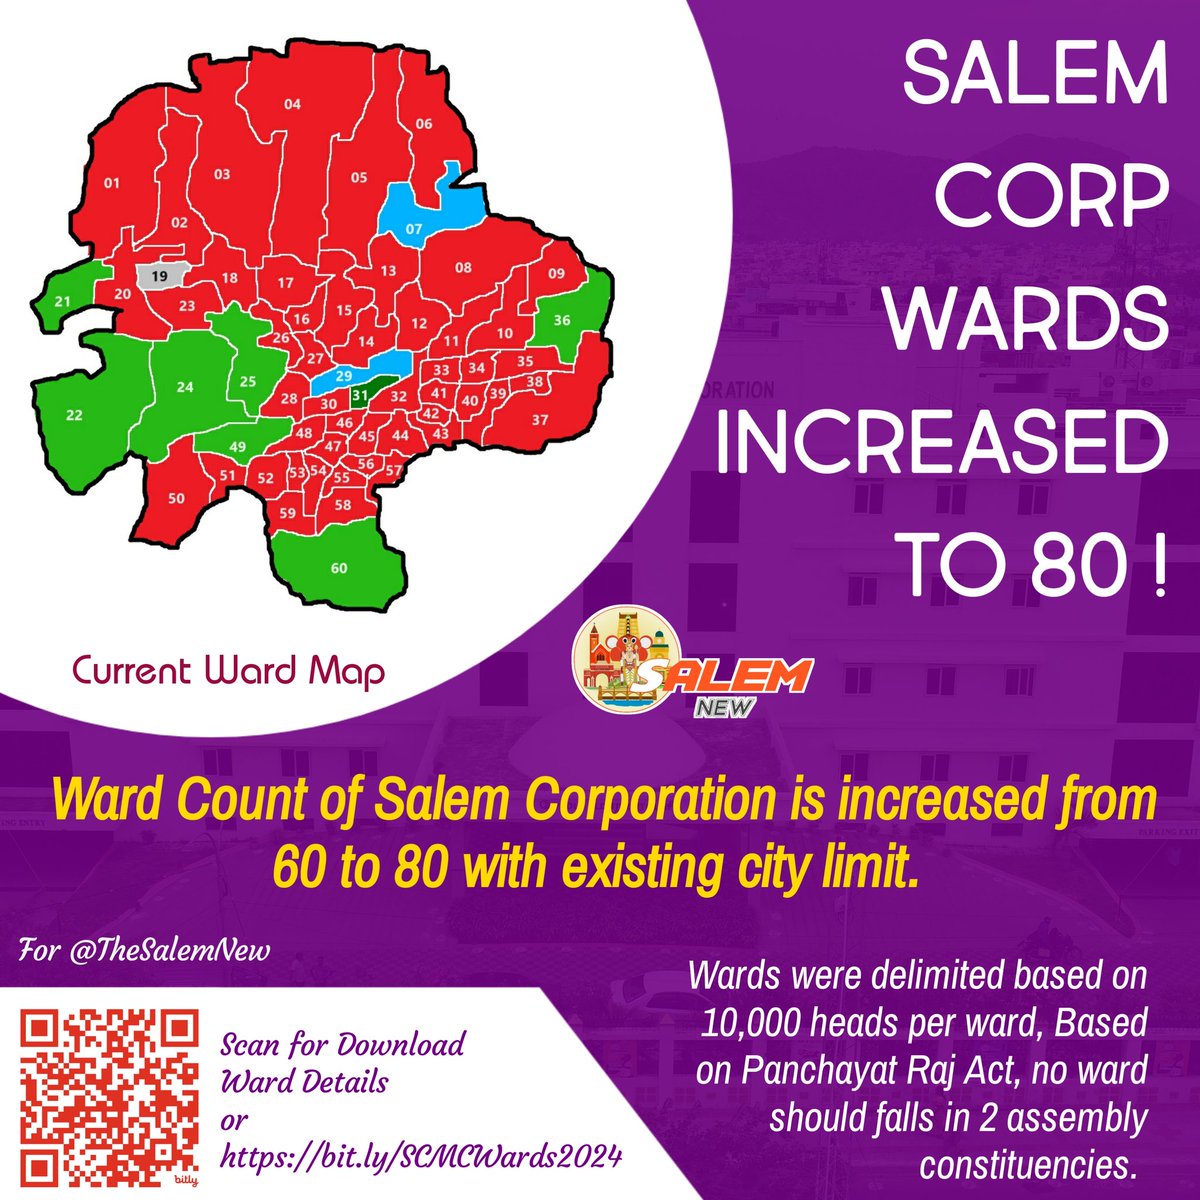 Salem Corporation ward count is increased from 60 to 80 with existing limit of 91 km². For Details of all 80 Wards, Download PDF from bit.ly/SCMCWards2024 #Salem #SalemCorporation #SCMC @salemcorpn